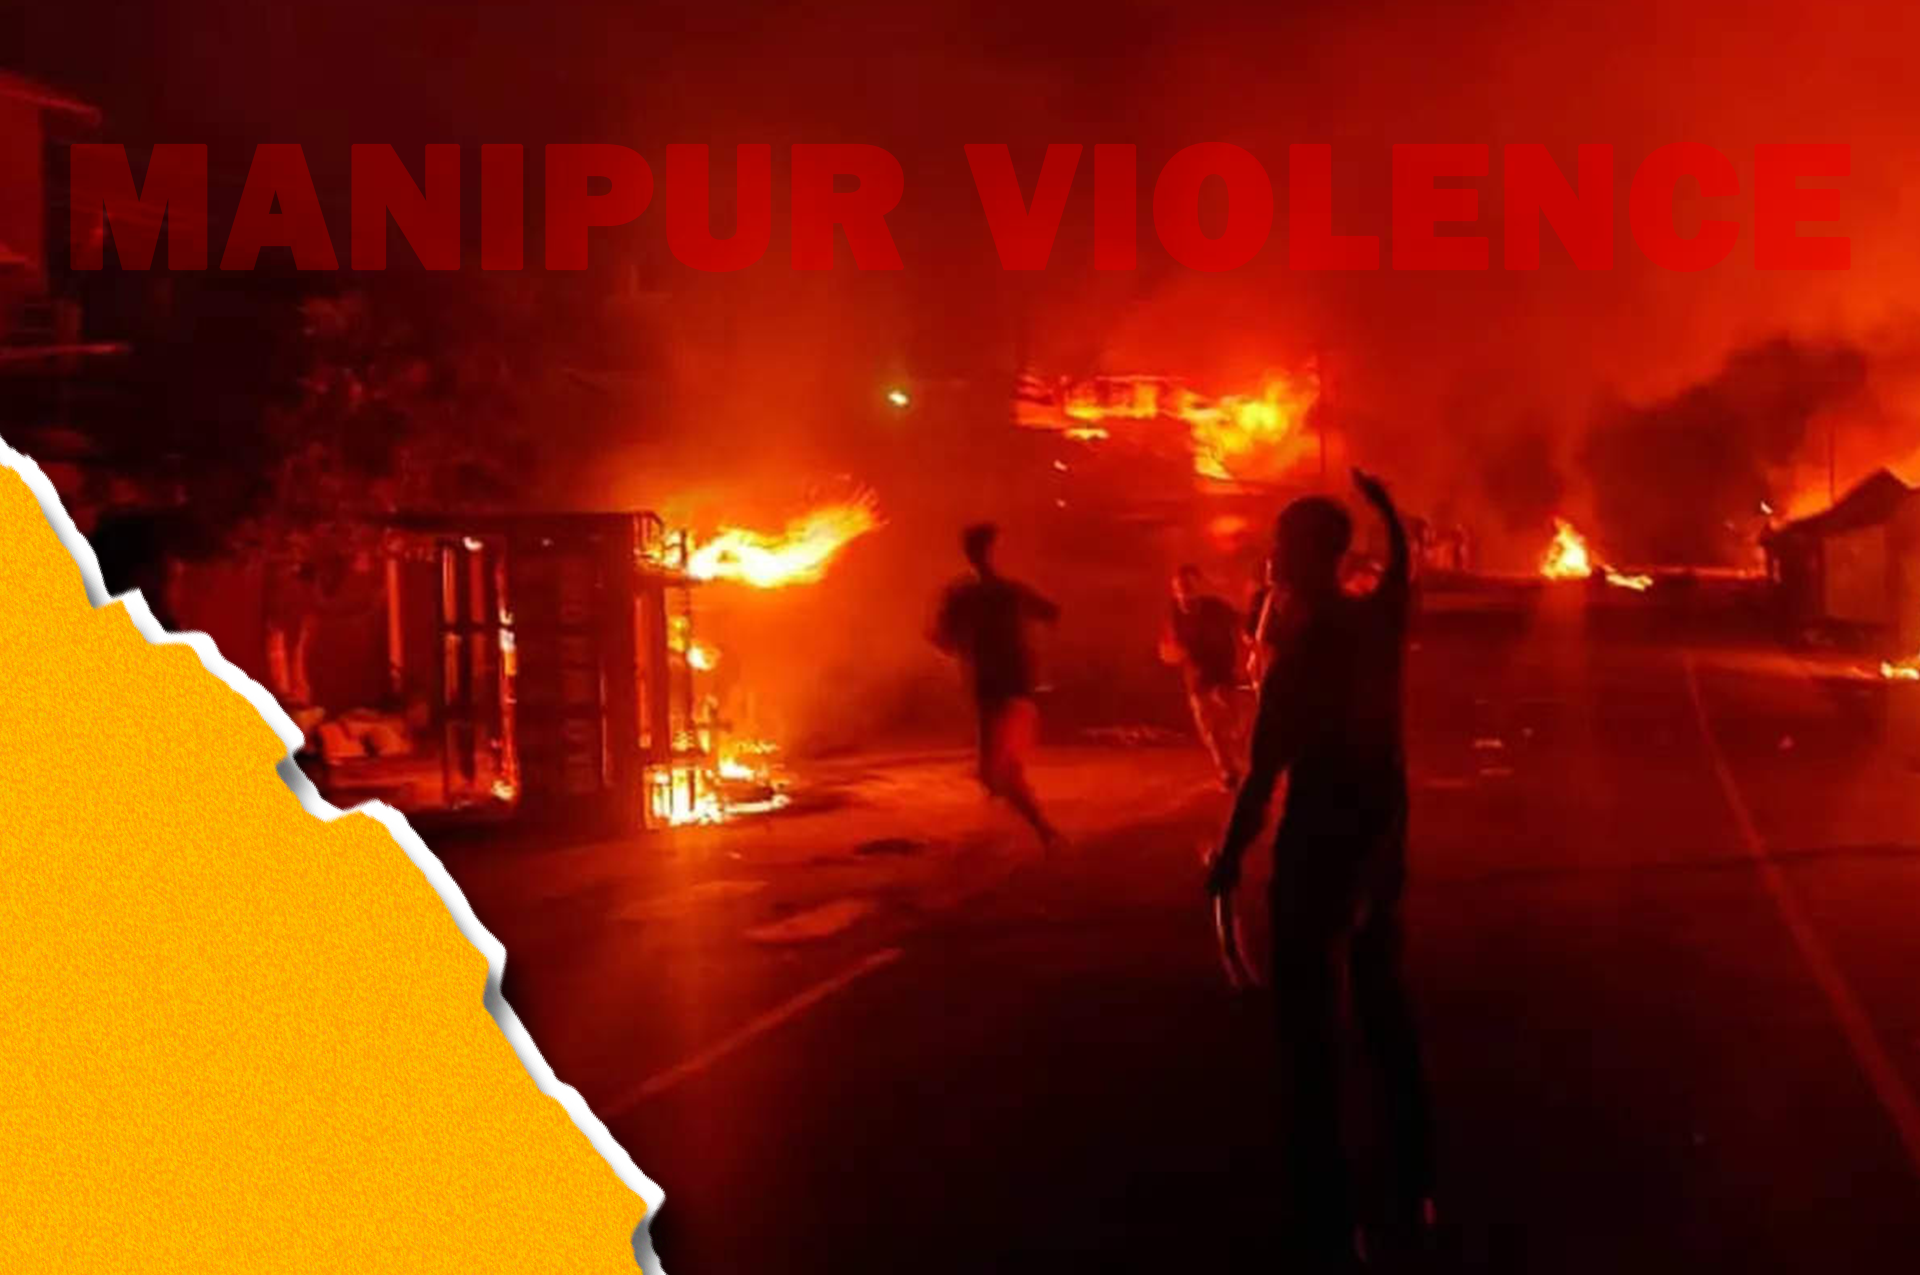 The Manipur Violence 